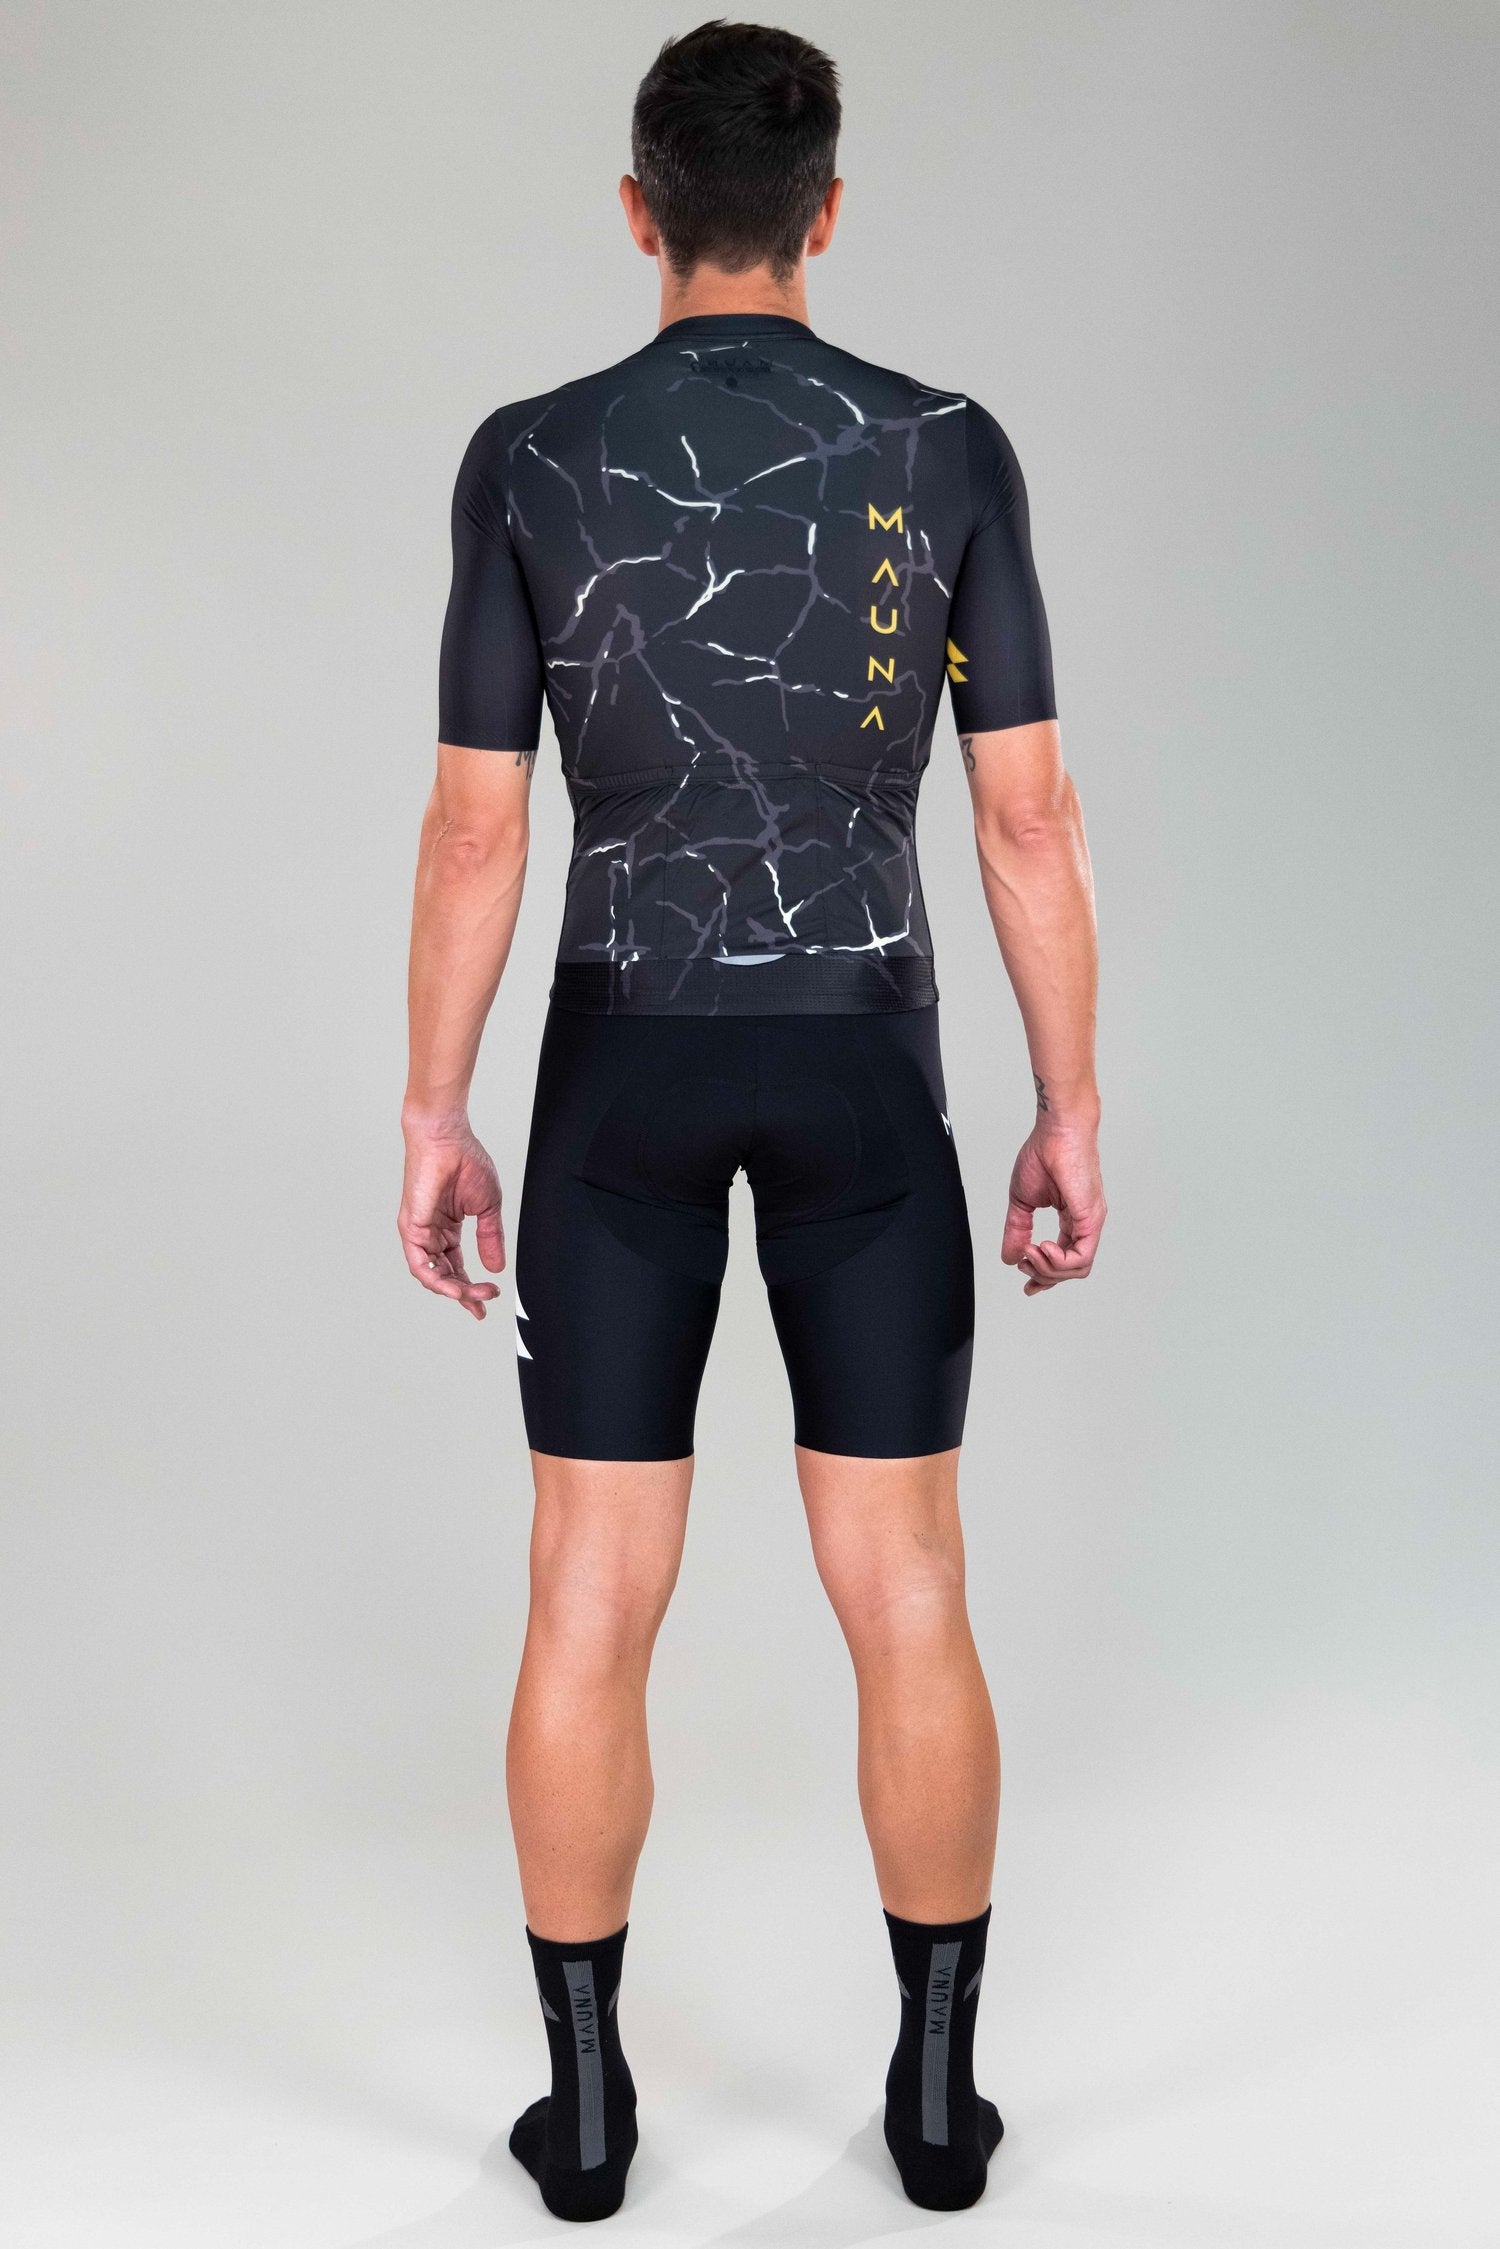 back full body view of man wearing Eldhraun force cycling jersey in black